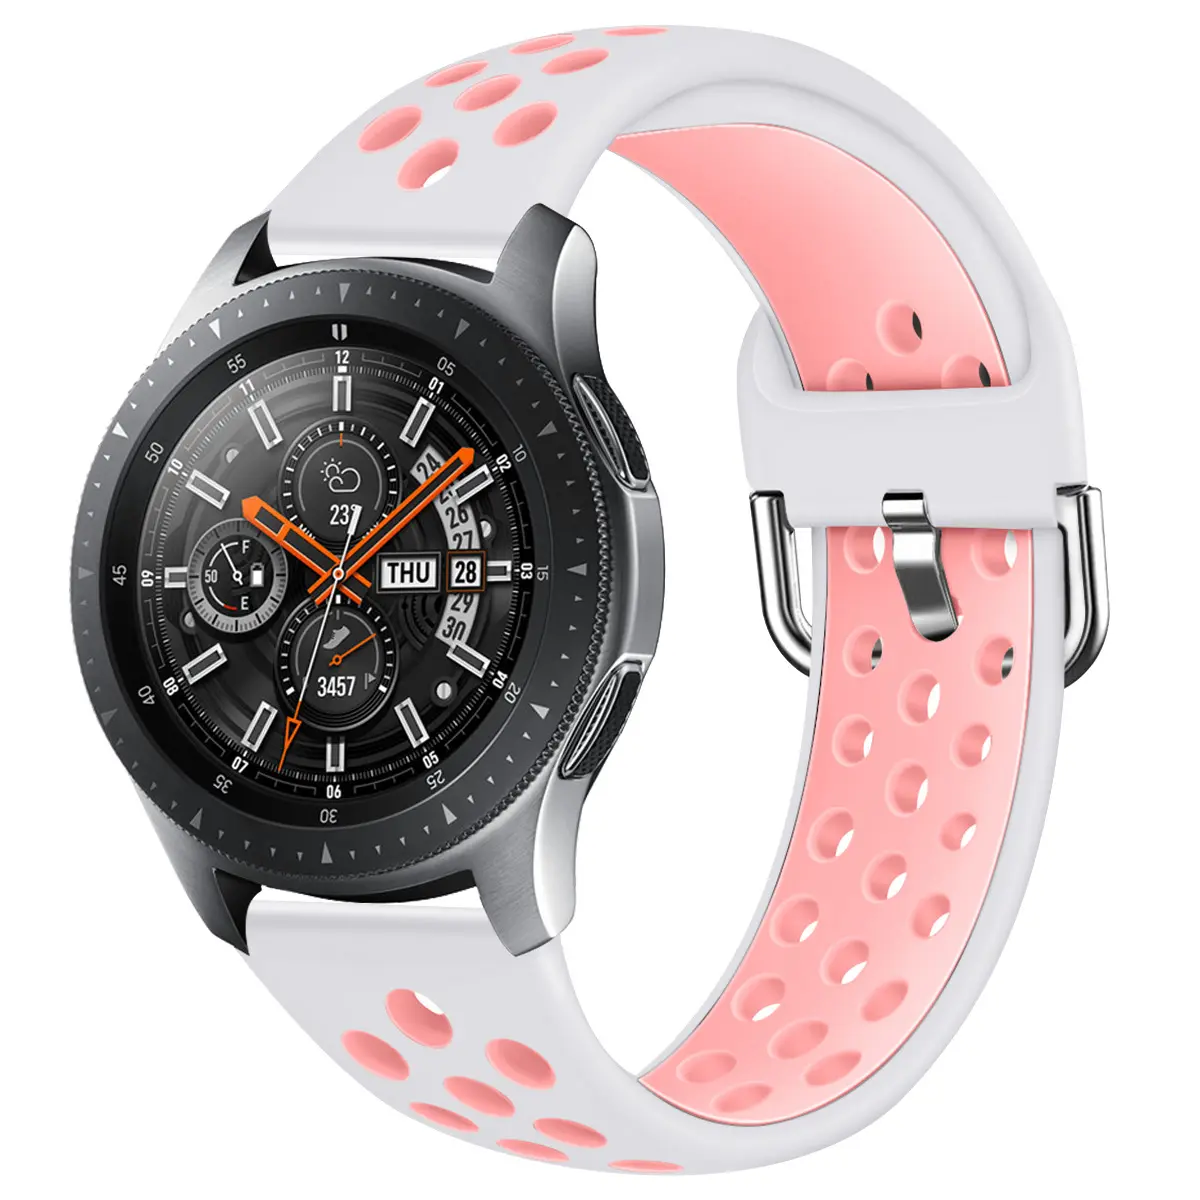 22mm 20mm Silicone strap for Samsung watch 3/4 Gear S3/Active 2 /Huawei watch 3/GT2 Sport Bracelet Belt for Amazfit GTR/Stratos